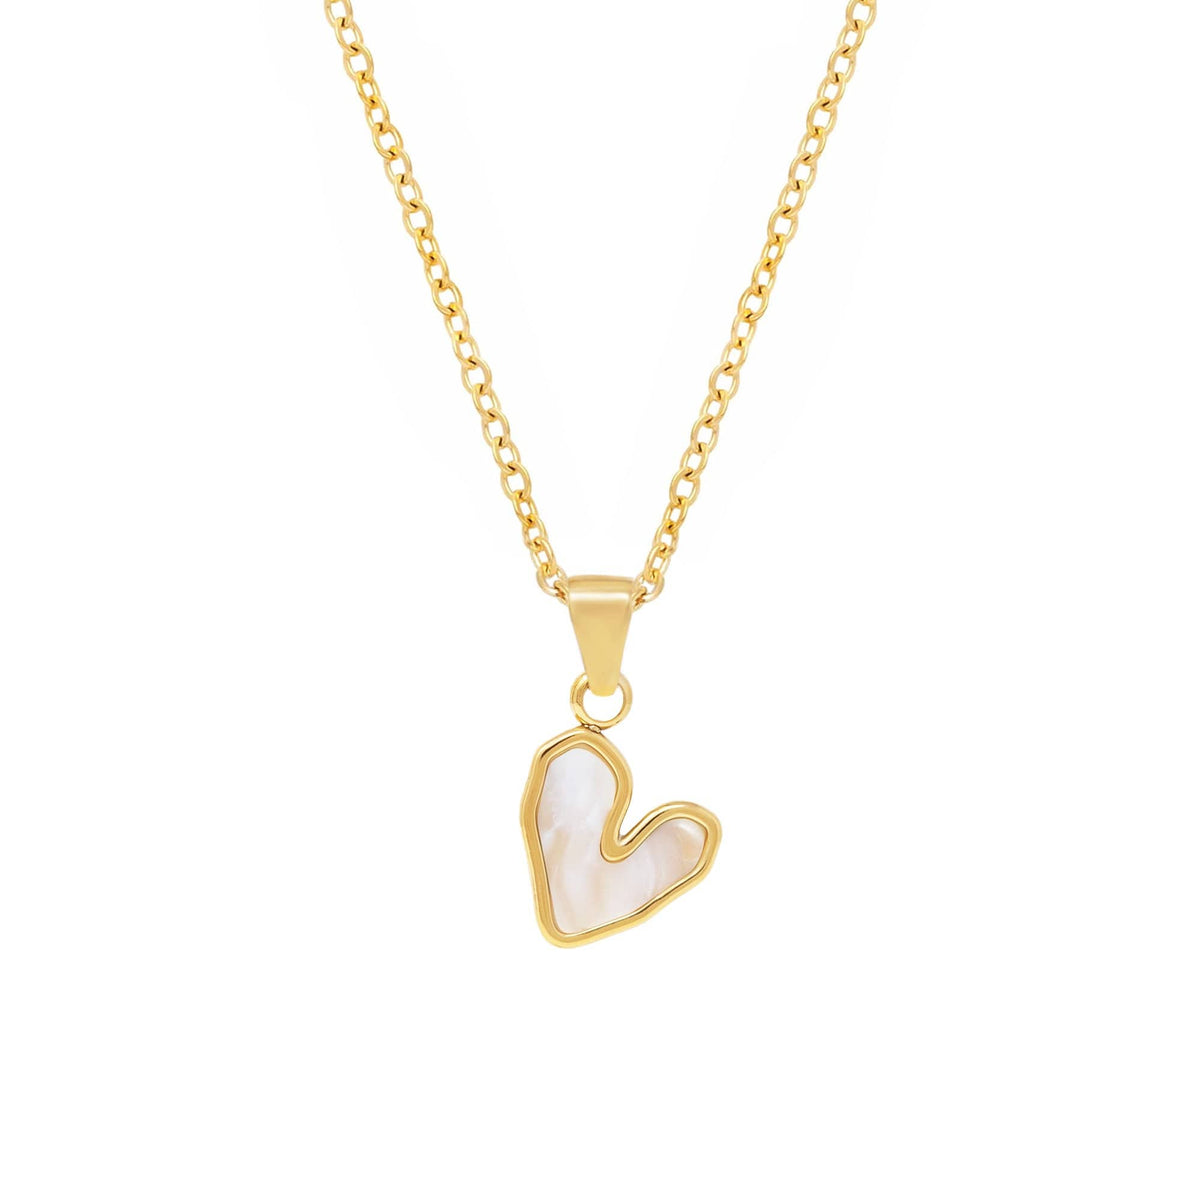 BohoMoon Stainless Steel Je T'aime Necklace Gold